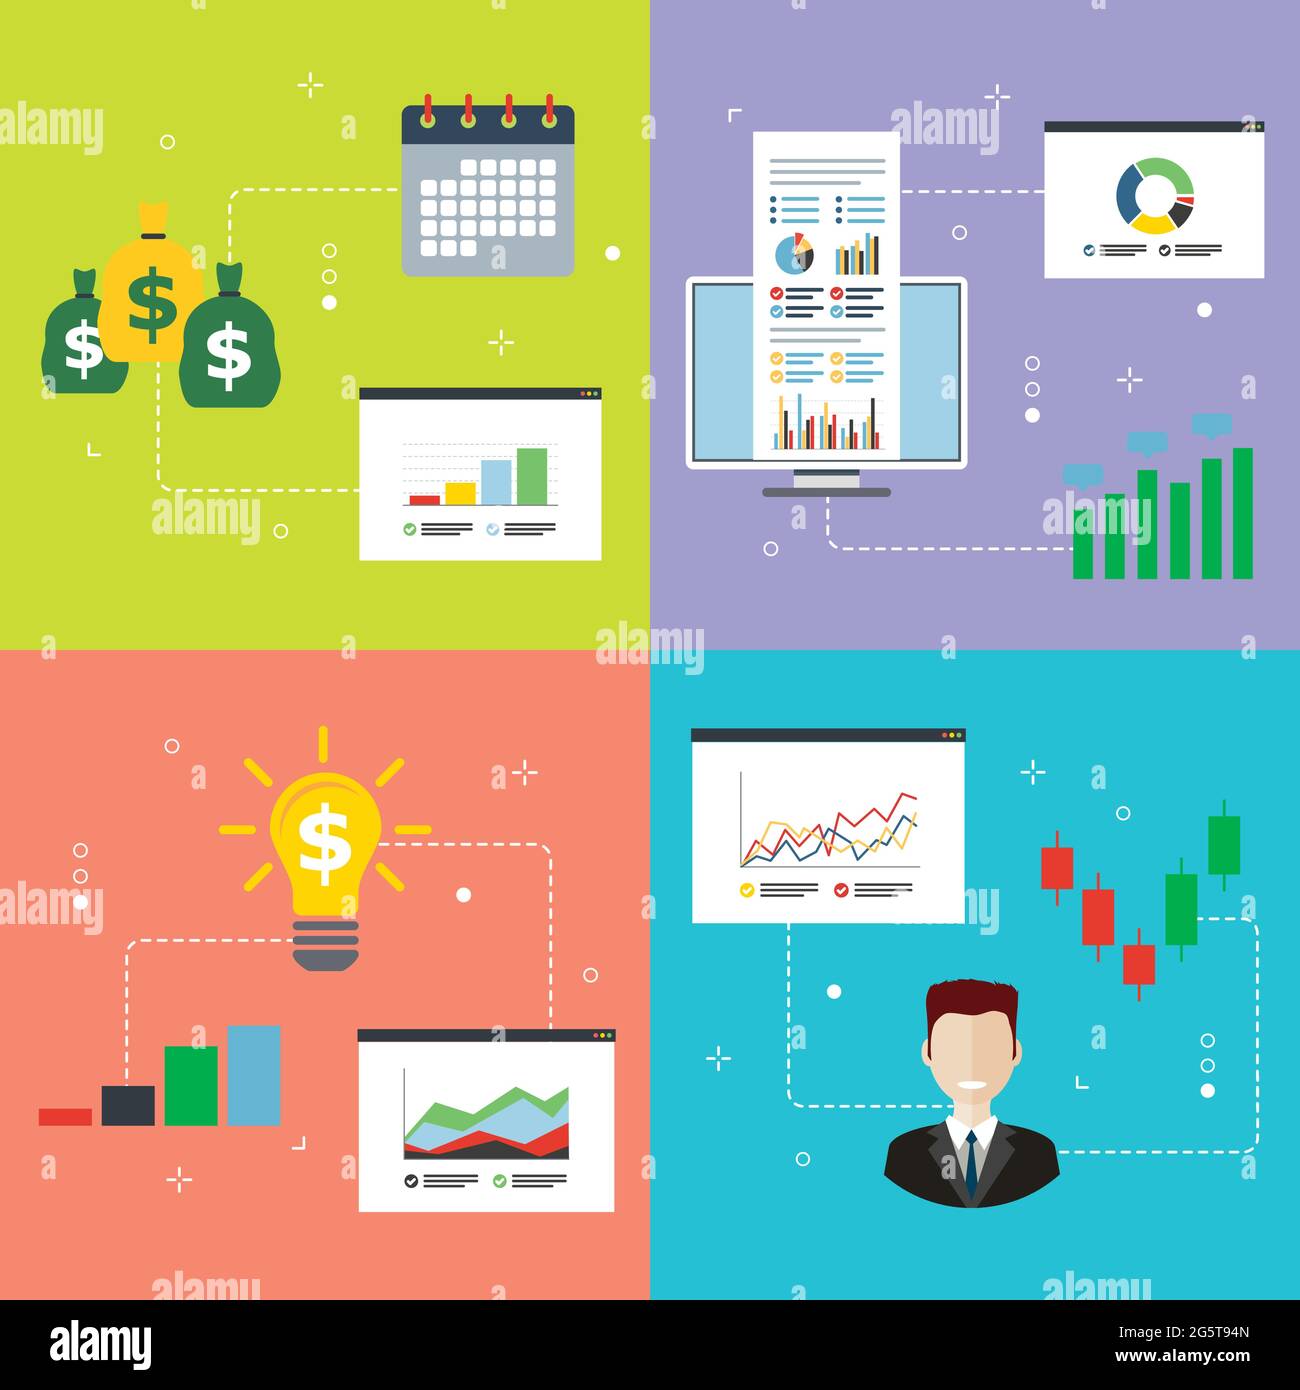 Finance, chart, business, investment and money icons. Concepts of financial profitability, financial application, expertise investment and stock marke Stock Vector